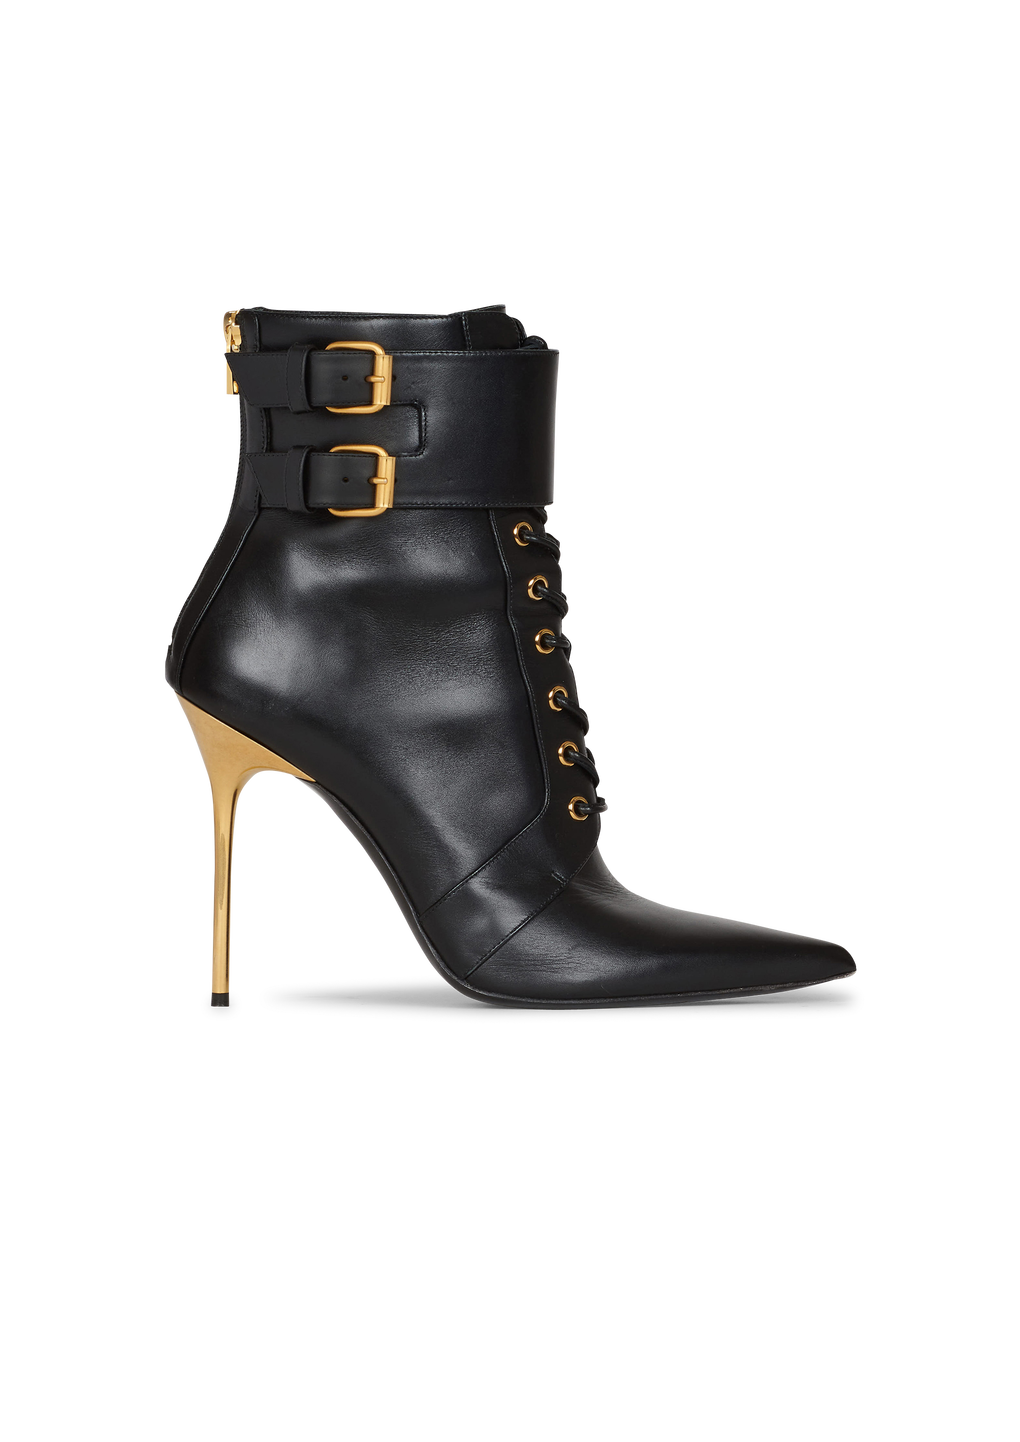 Leather Uria ankle boots, black, hi-res